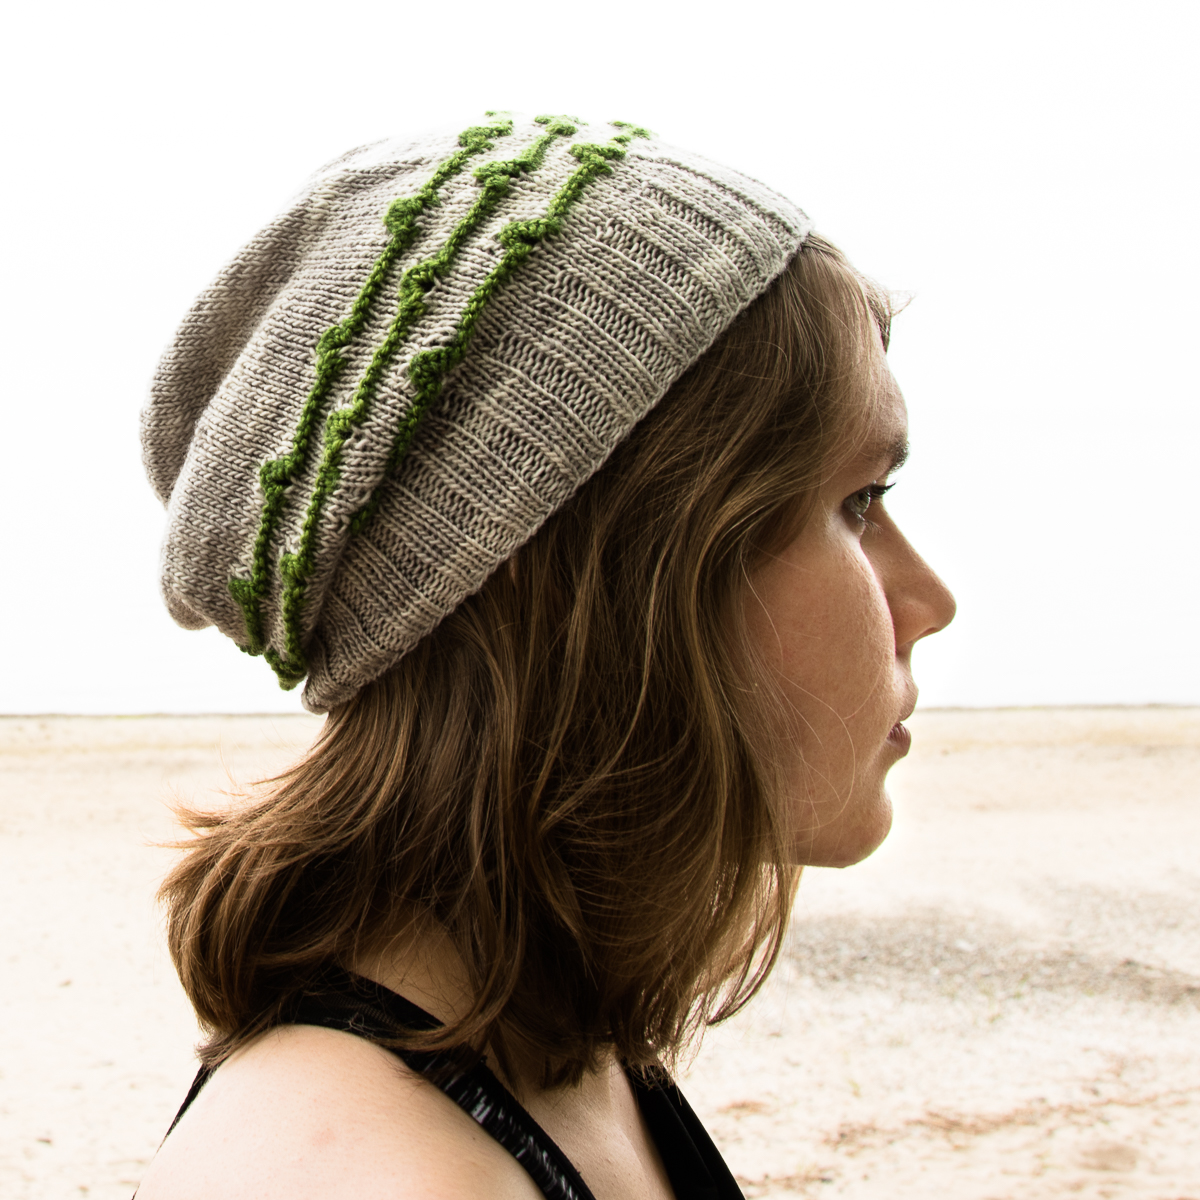 Persian Windows Hat - a knitting pattern from Imagined Landscapes Designs